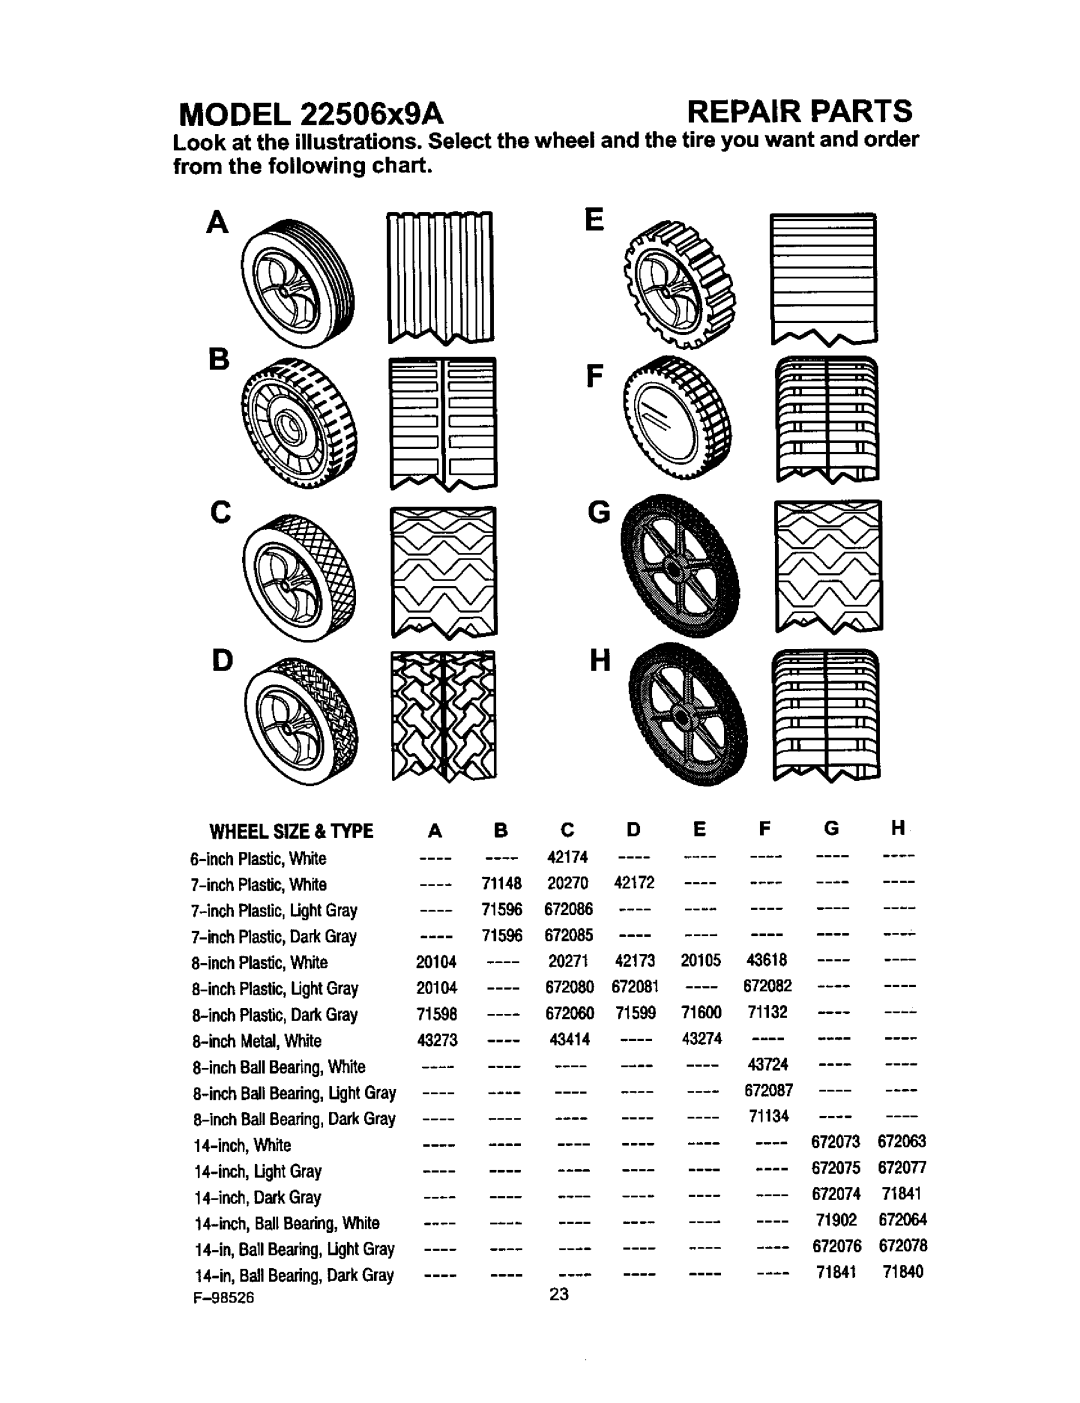 Murray F-98526 MODEL 22506x9A, Repair Parts, from the following chart, Look at the illustrations. Select the wheel 